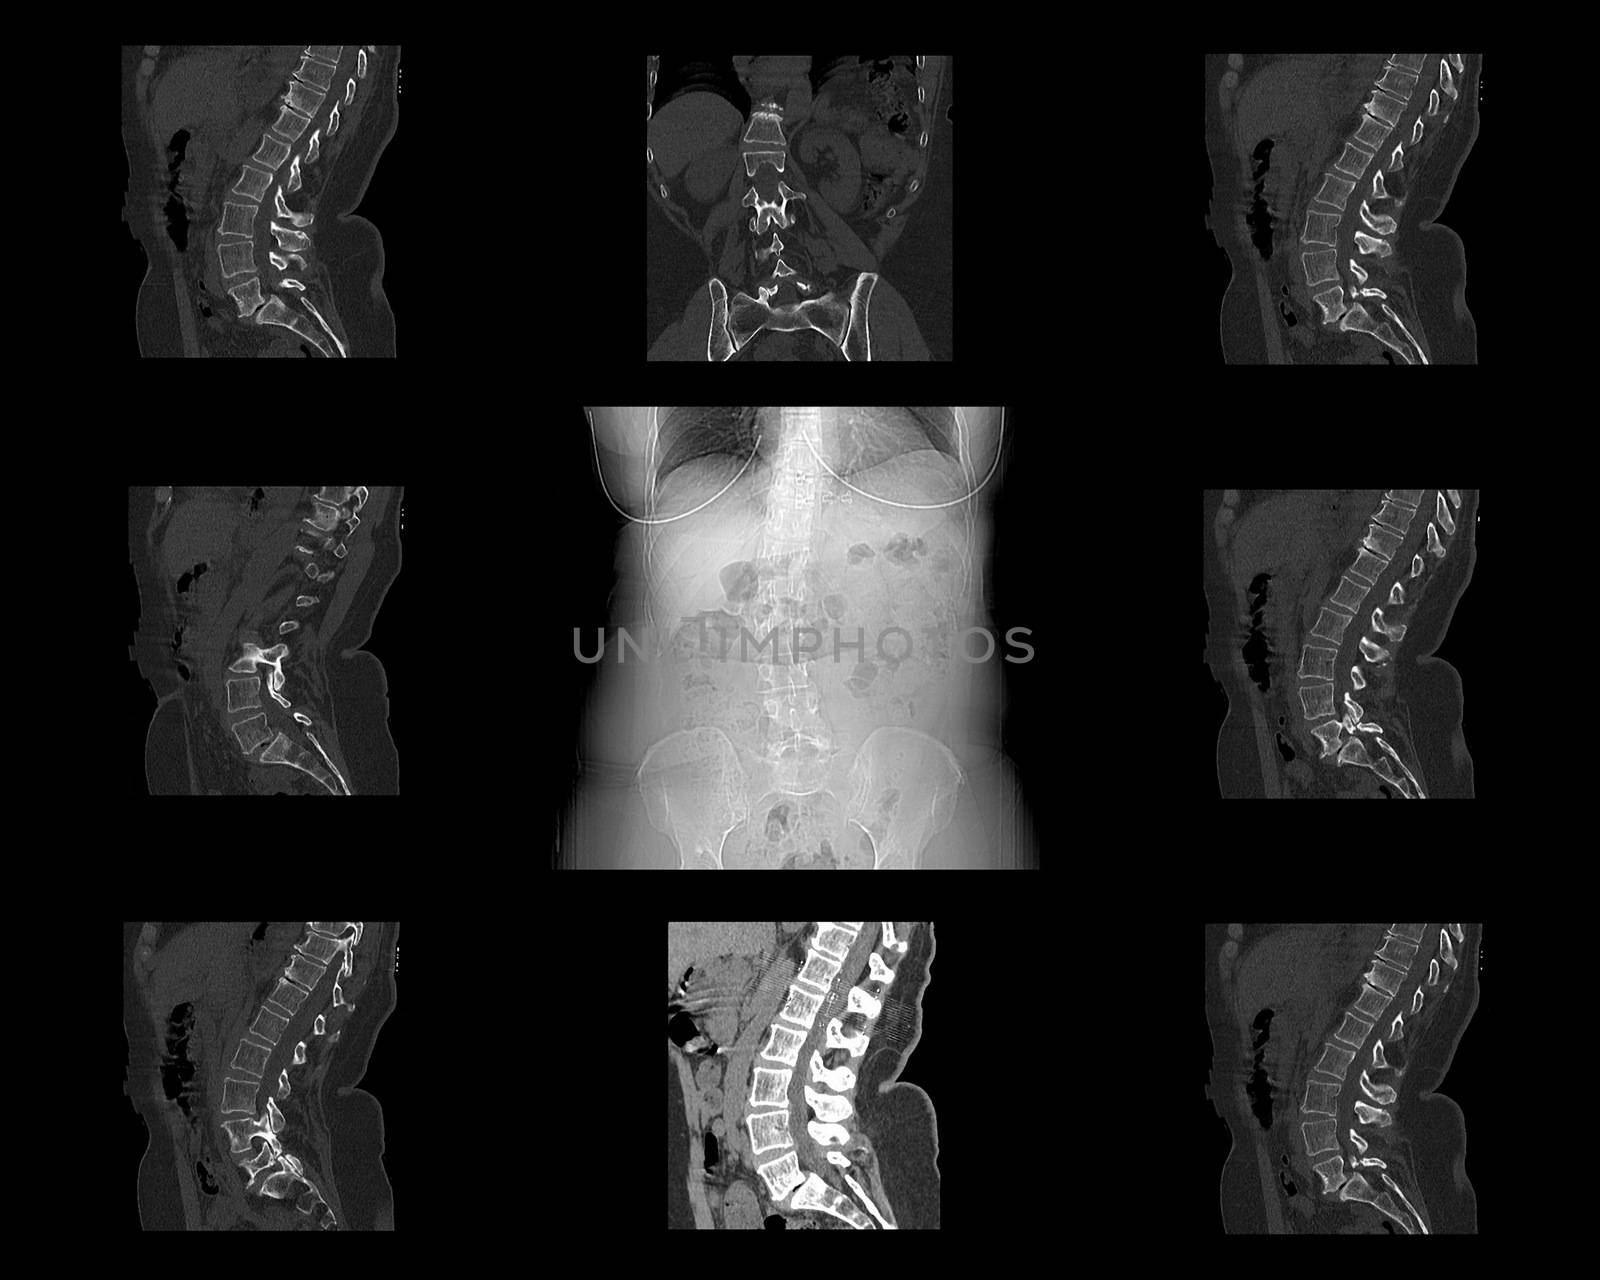 Computed Tomography of lumbar spine, lower back